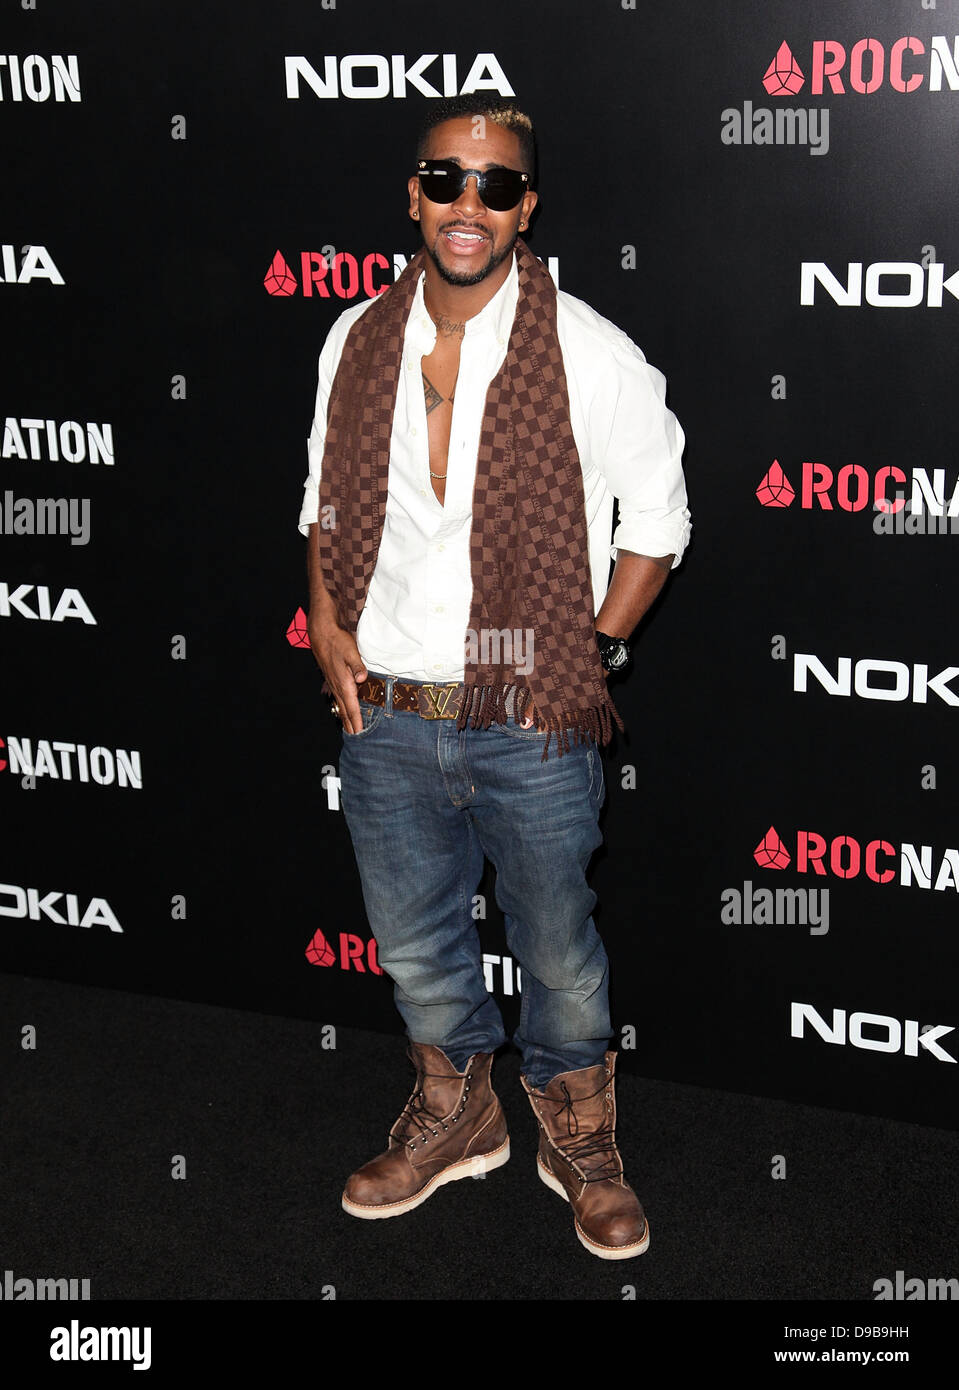 Omarion Roc Nation Pre-Grammy Brunch at Soho House West Hollywood, California - 11.02.12 Stock Photo